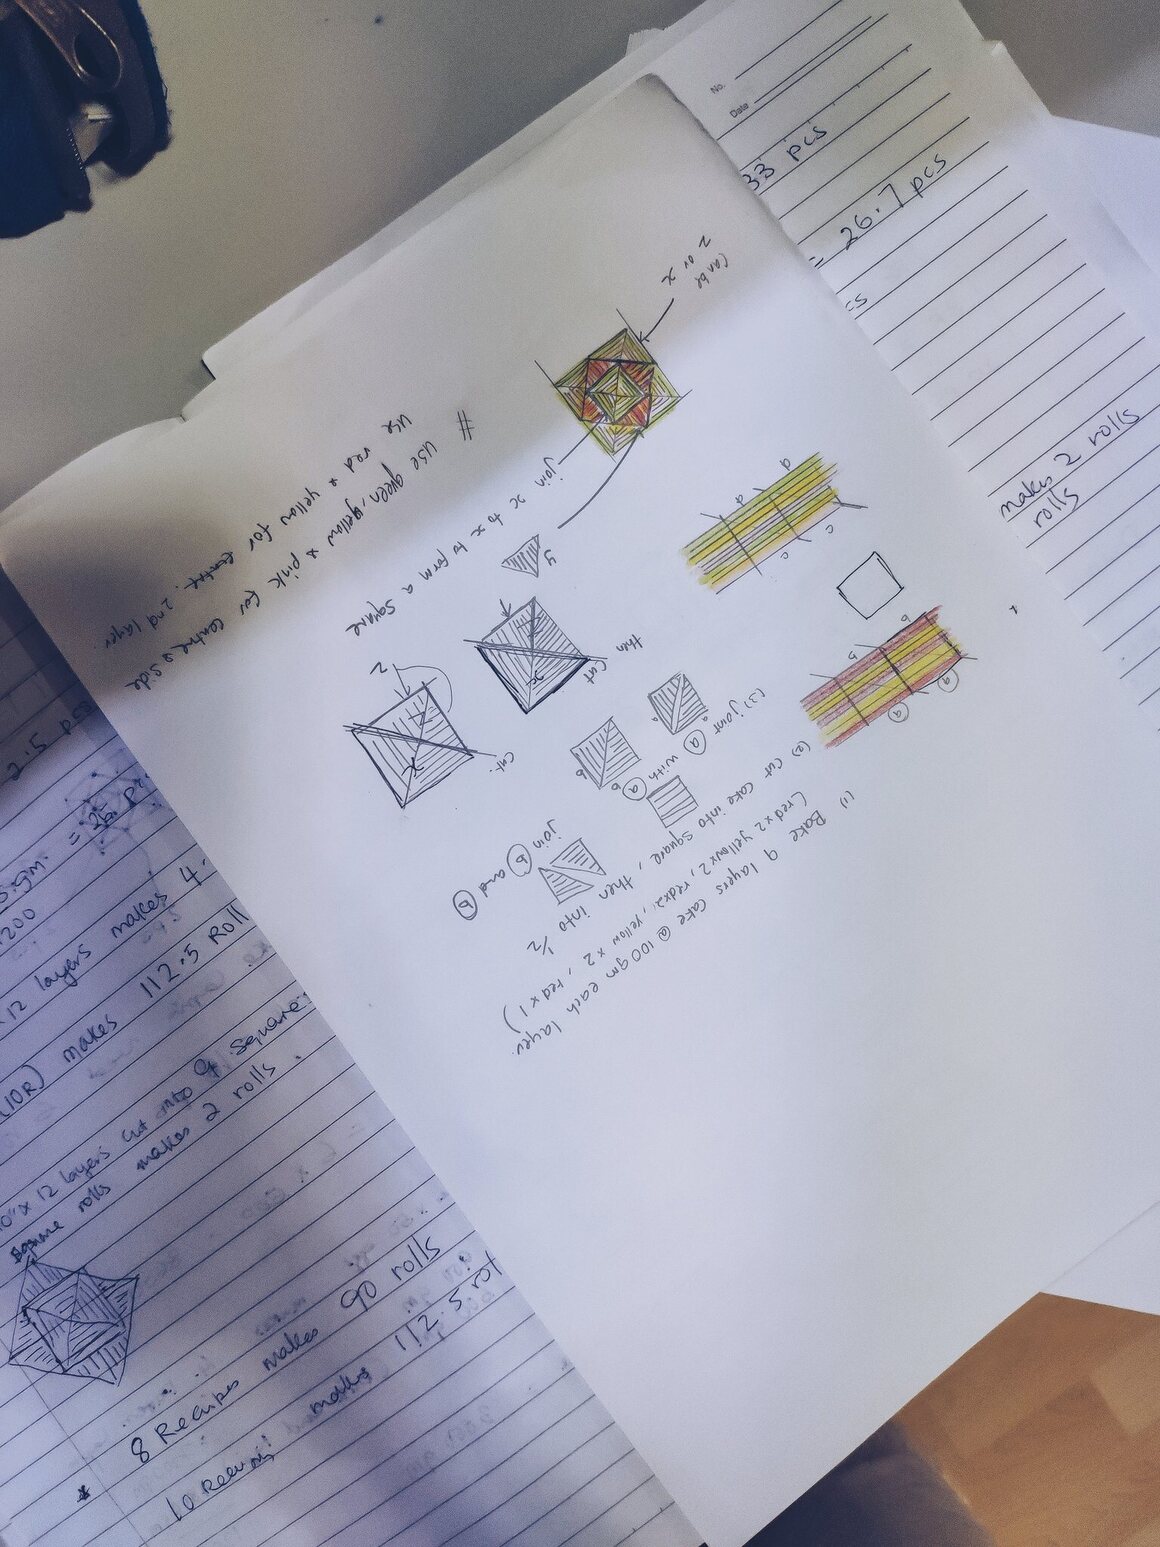 Chen uses diagrams to both plan her cake designs and record them for further use.